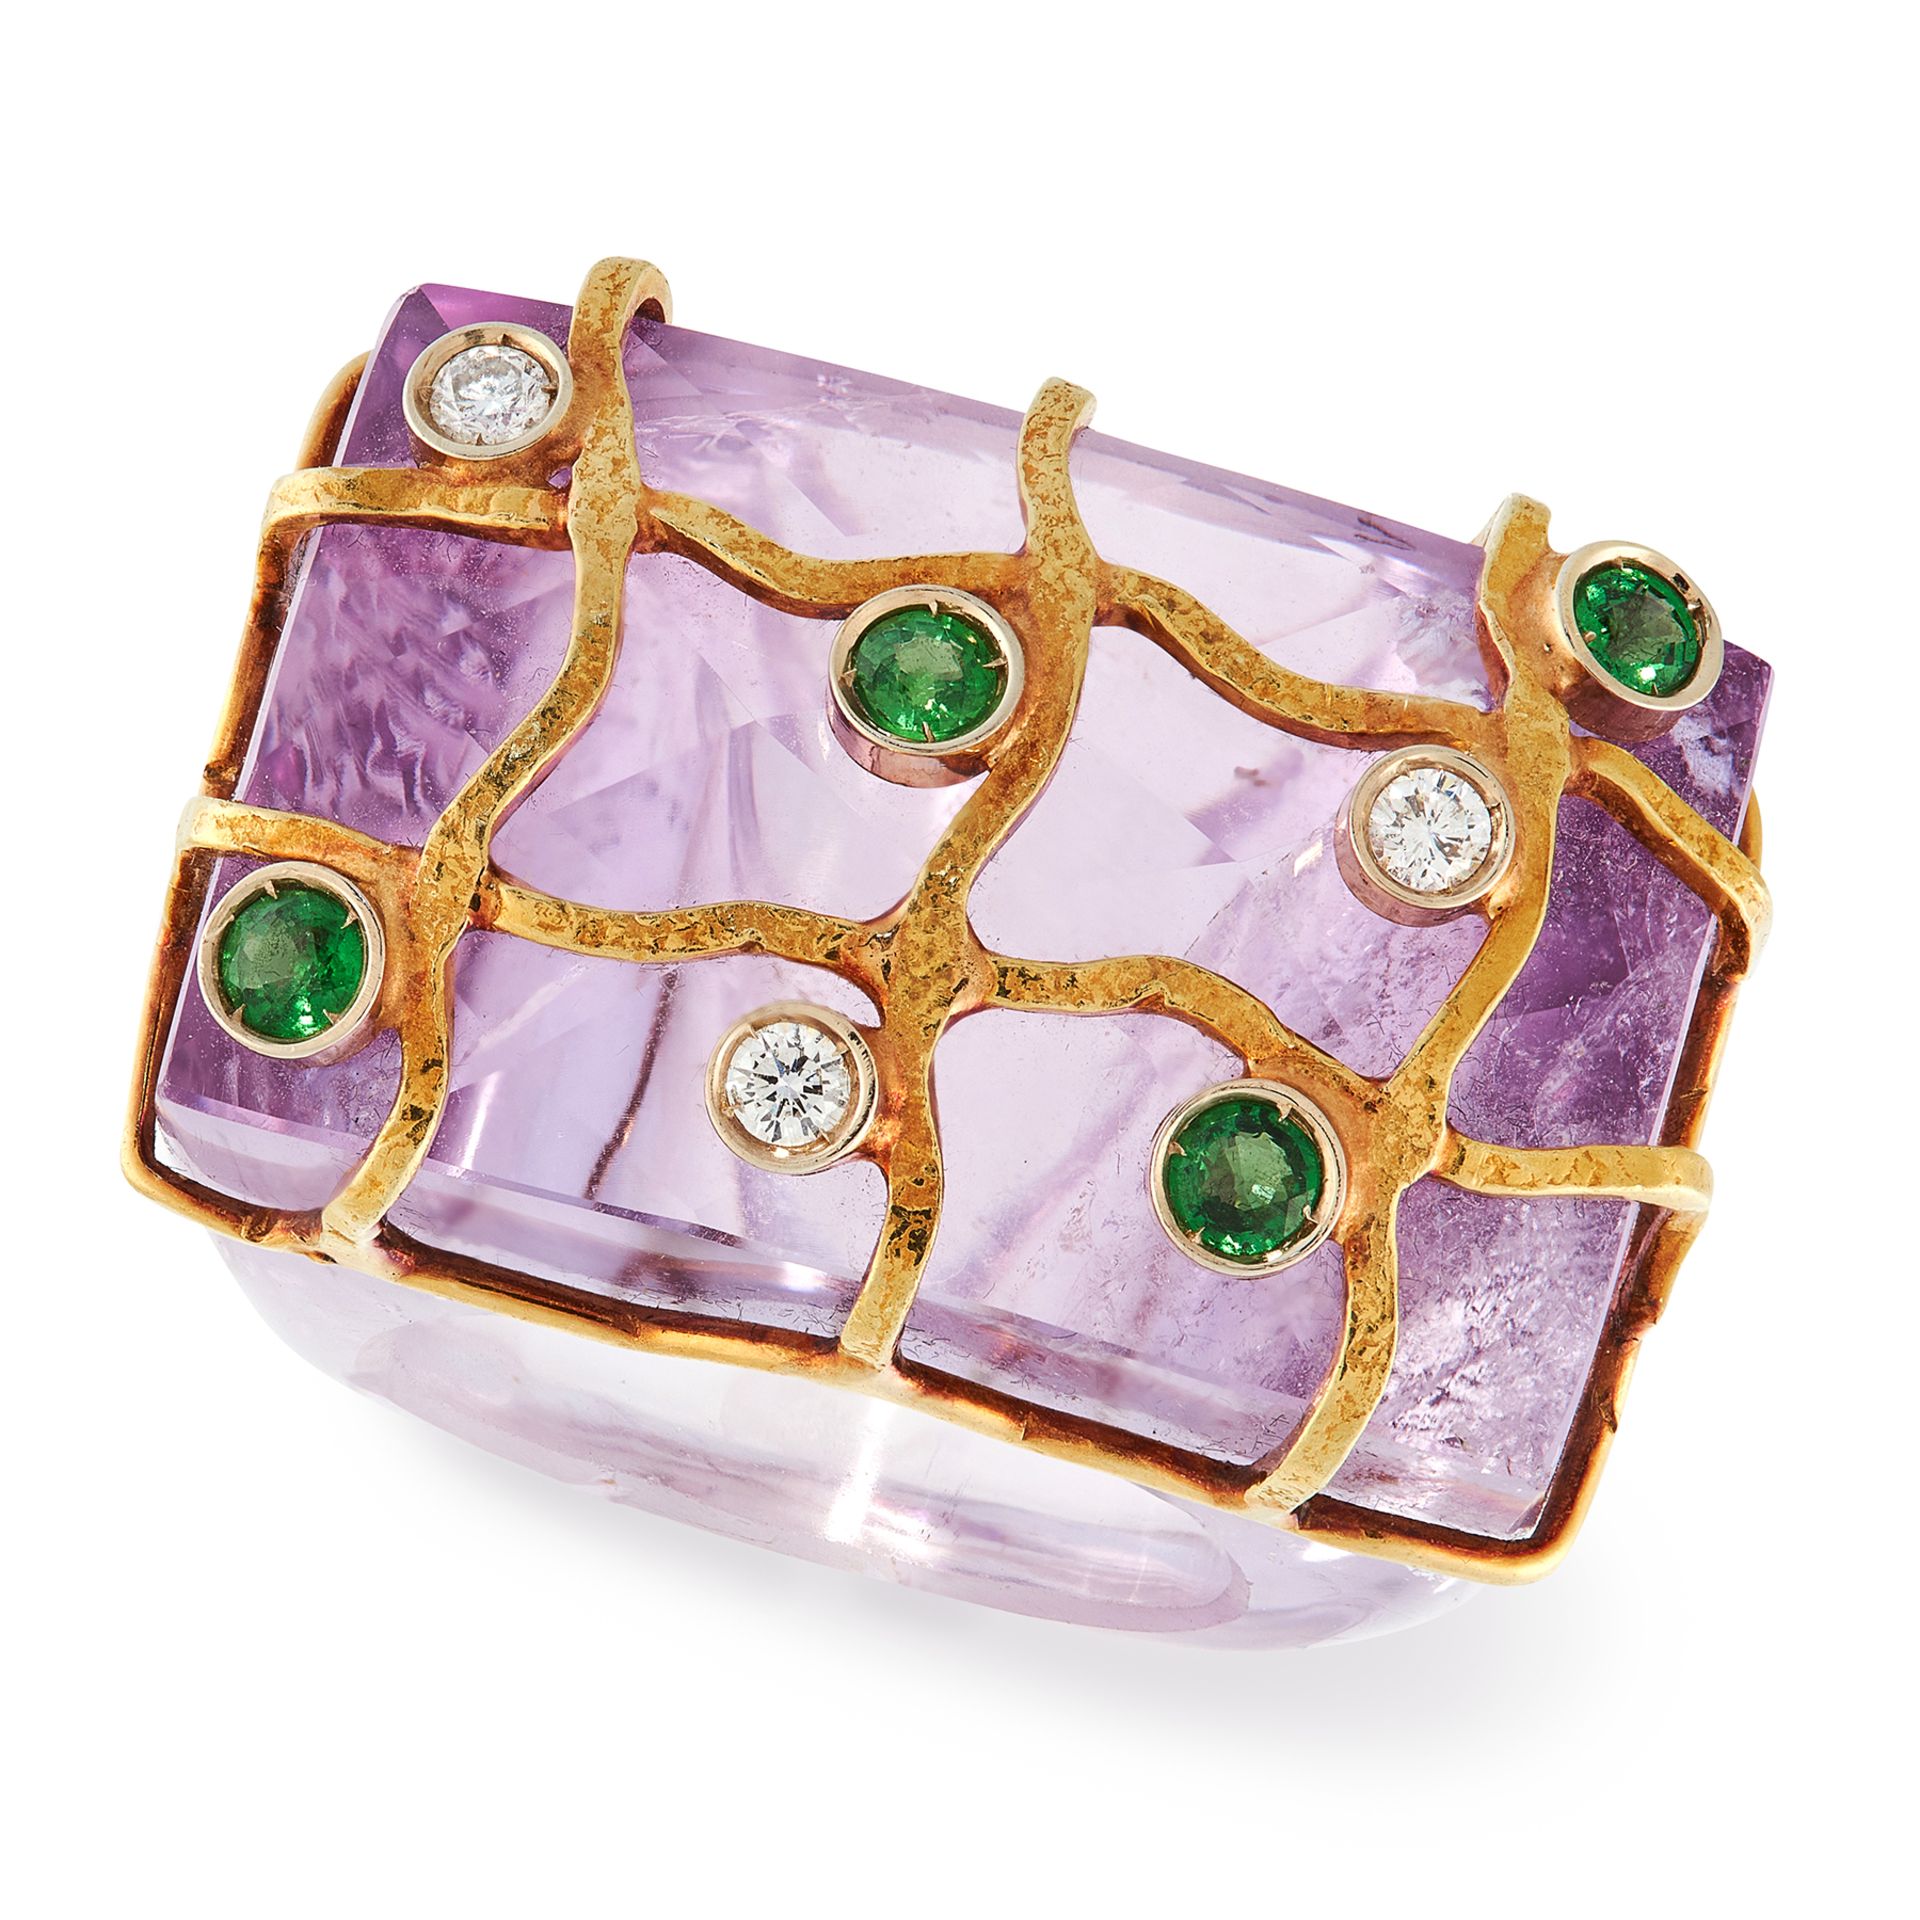 AN AMETHYST, DIAMOND AND TSAVORITE GARNET COCKTAIL RING comprising of a polished piece of